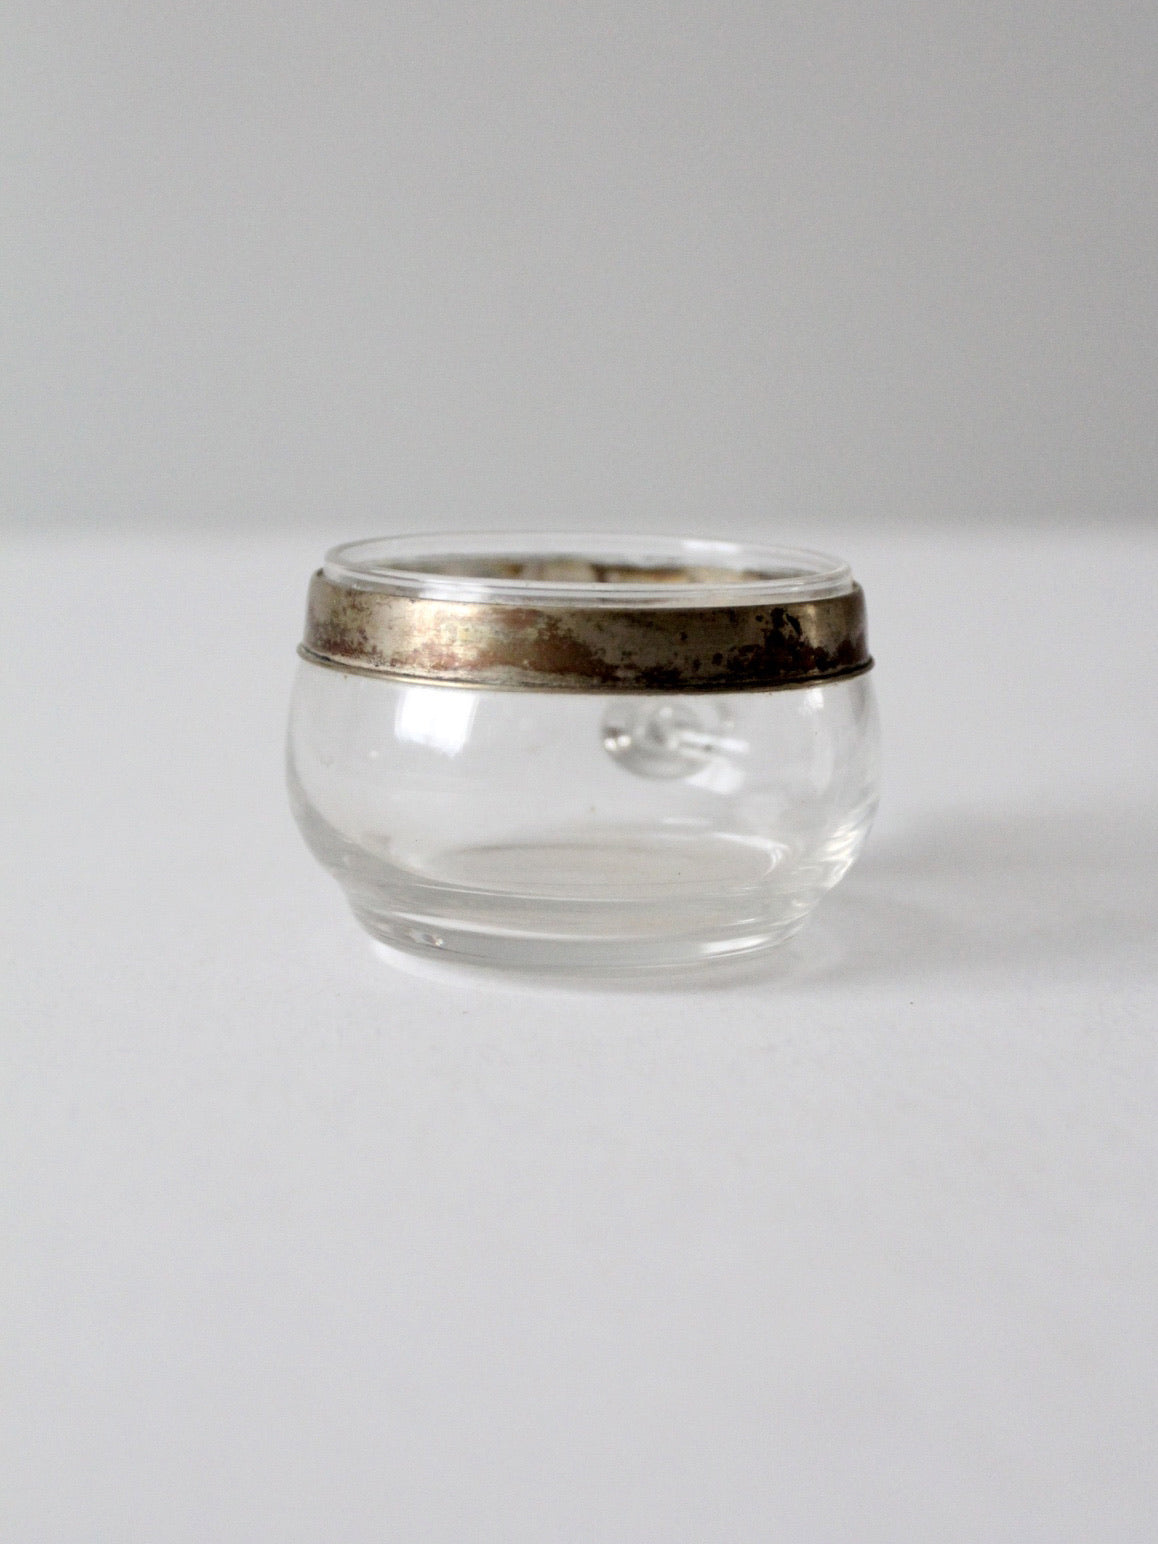 vintage silver rimmed glass cup